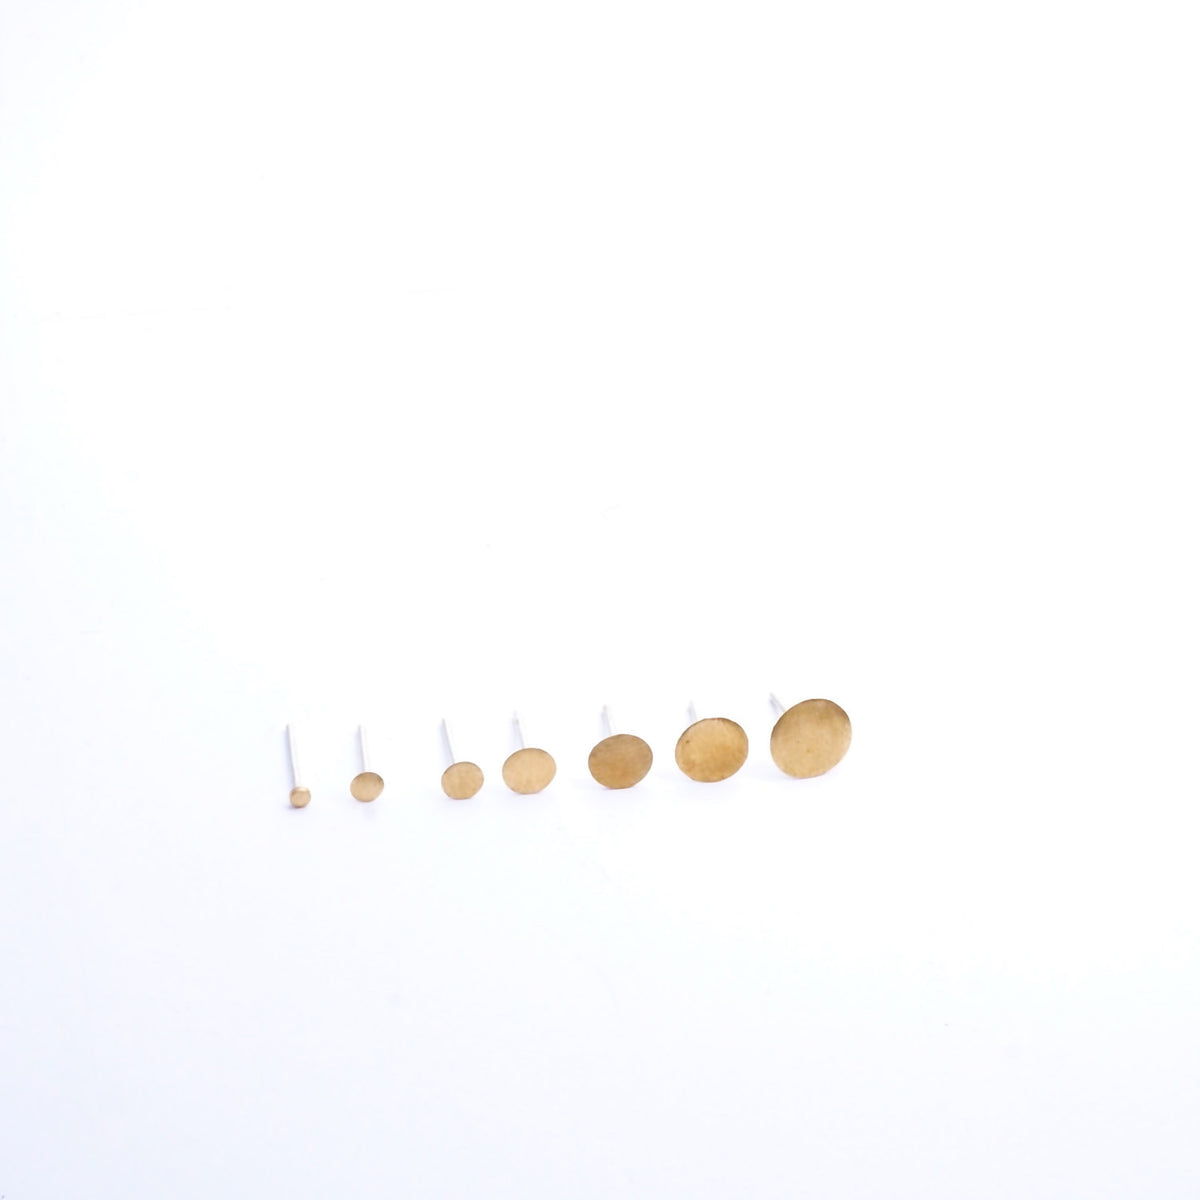 Tasteful and Classic - Hand-Made Solid 18k Gold Circle Studs - 0247 - Virginia Wynne Designs